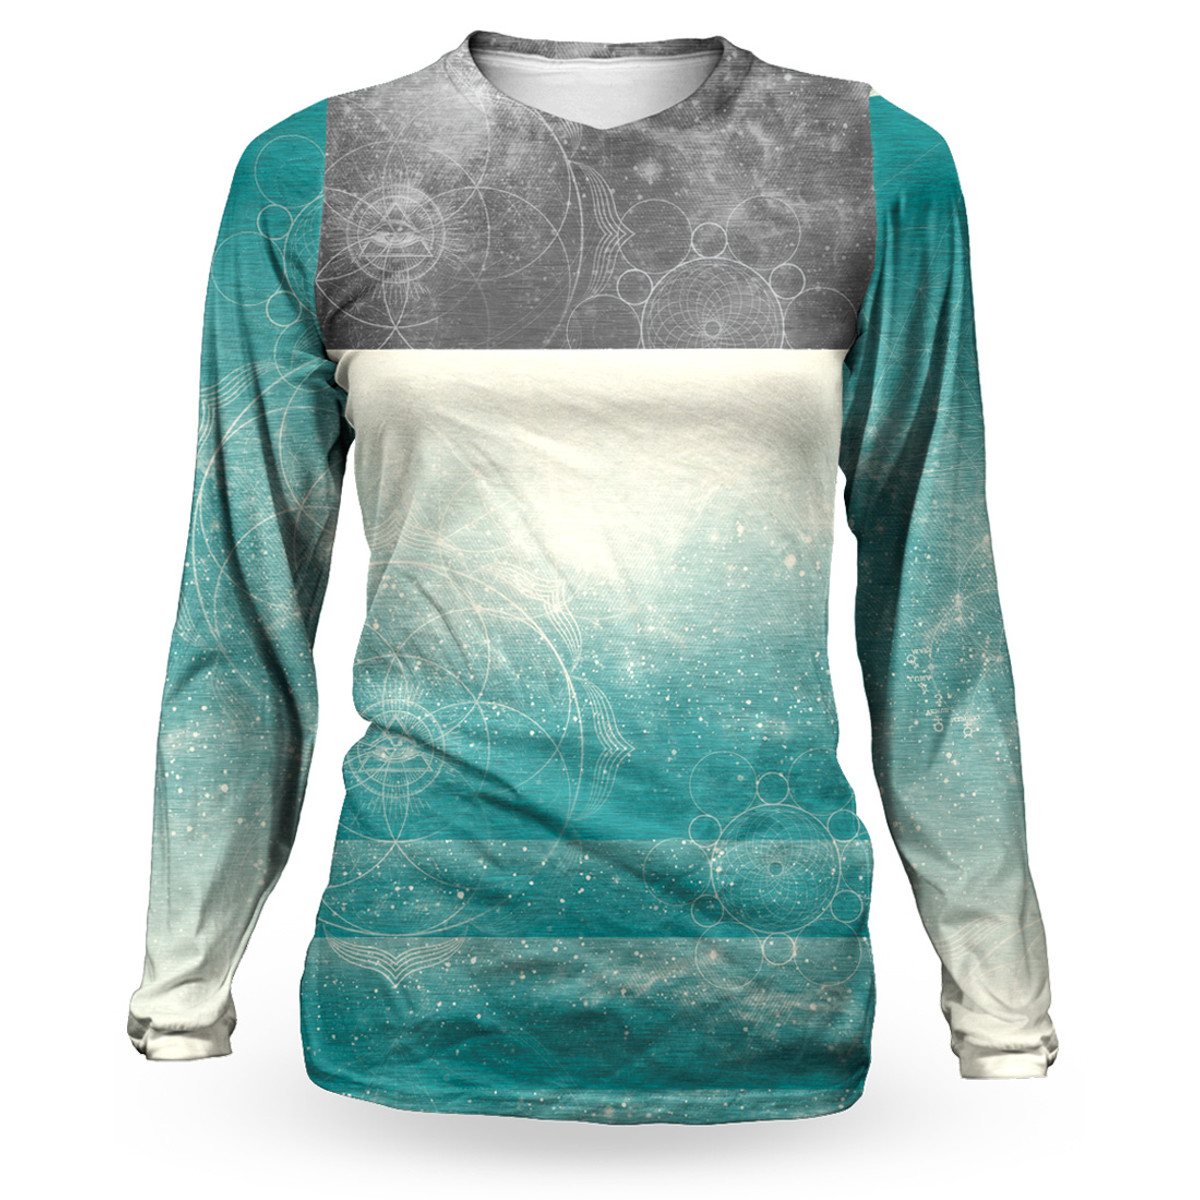 Loose Riders Femme Maillot VTT Manches Longues  Gradient - Turquoise/Grey